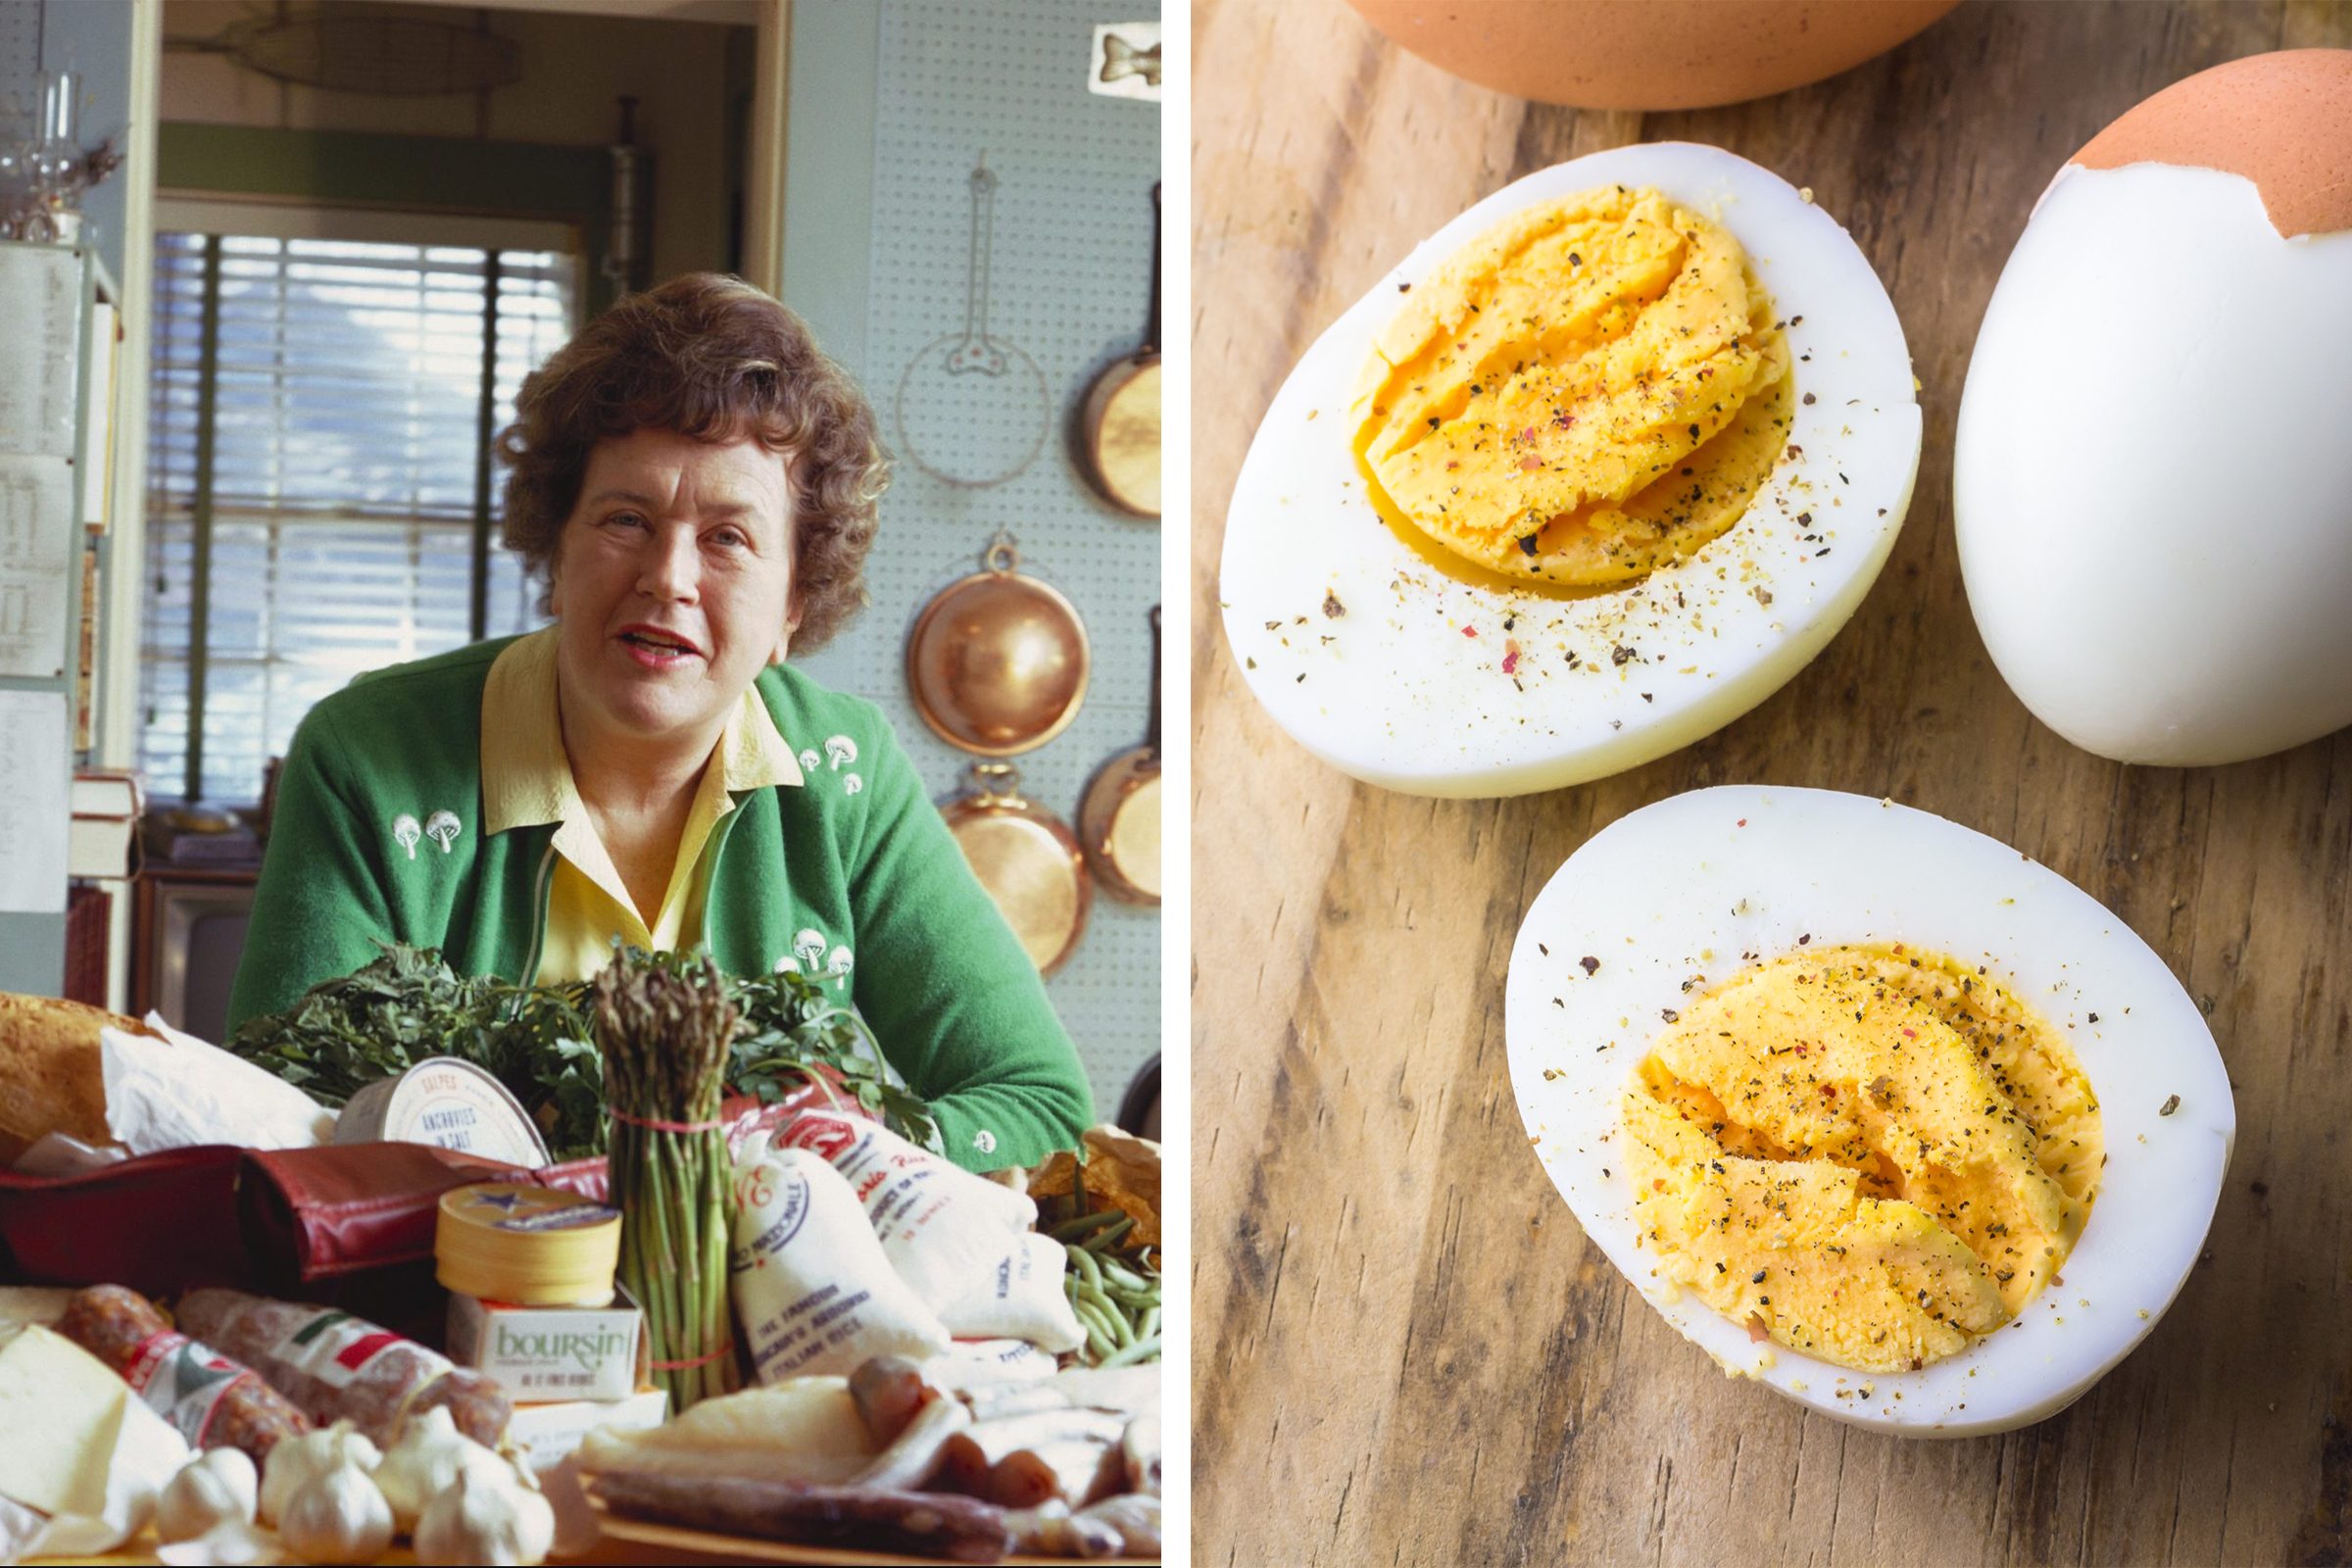 https://www.tasteofhome.com/wp-content/uploads/1969/12/julia-childs-and-hard-boiled-eggs_getty.jpg?fit=700%2C1024